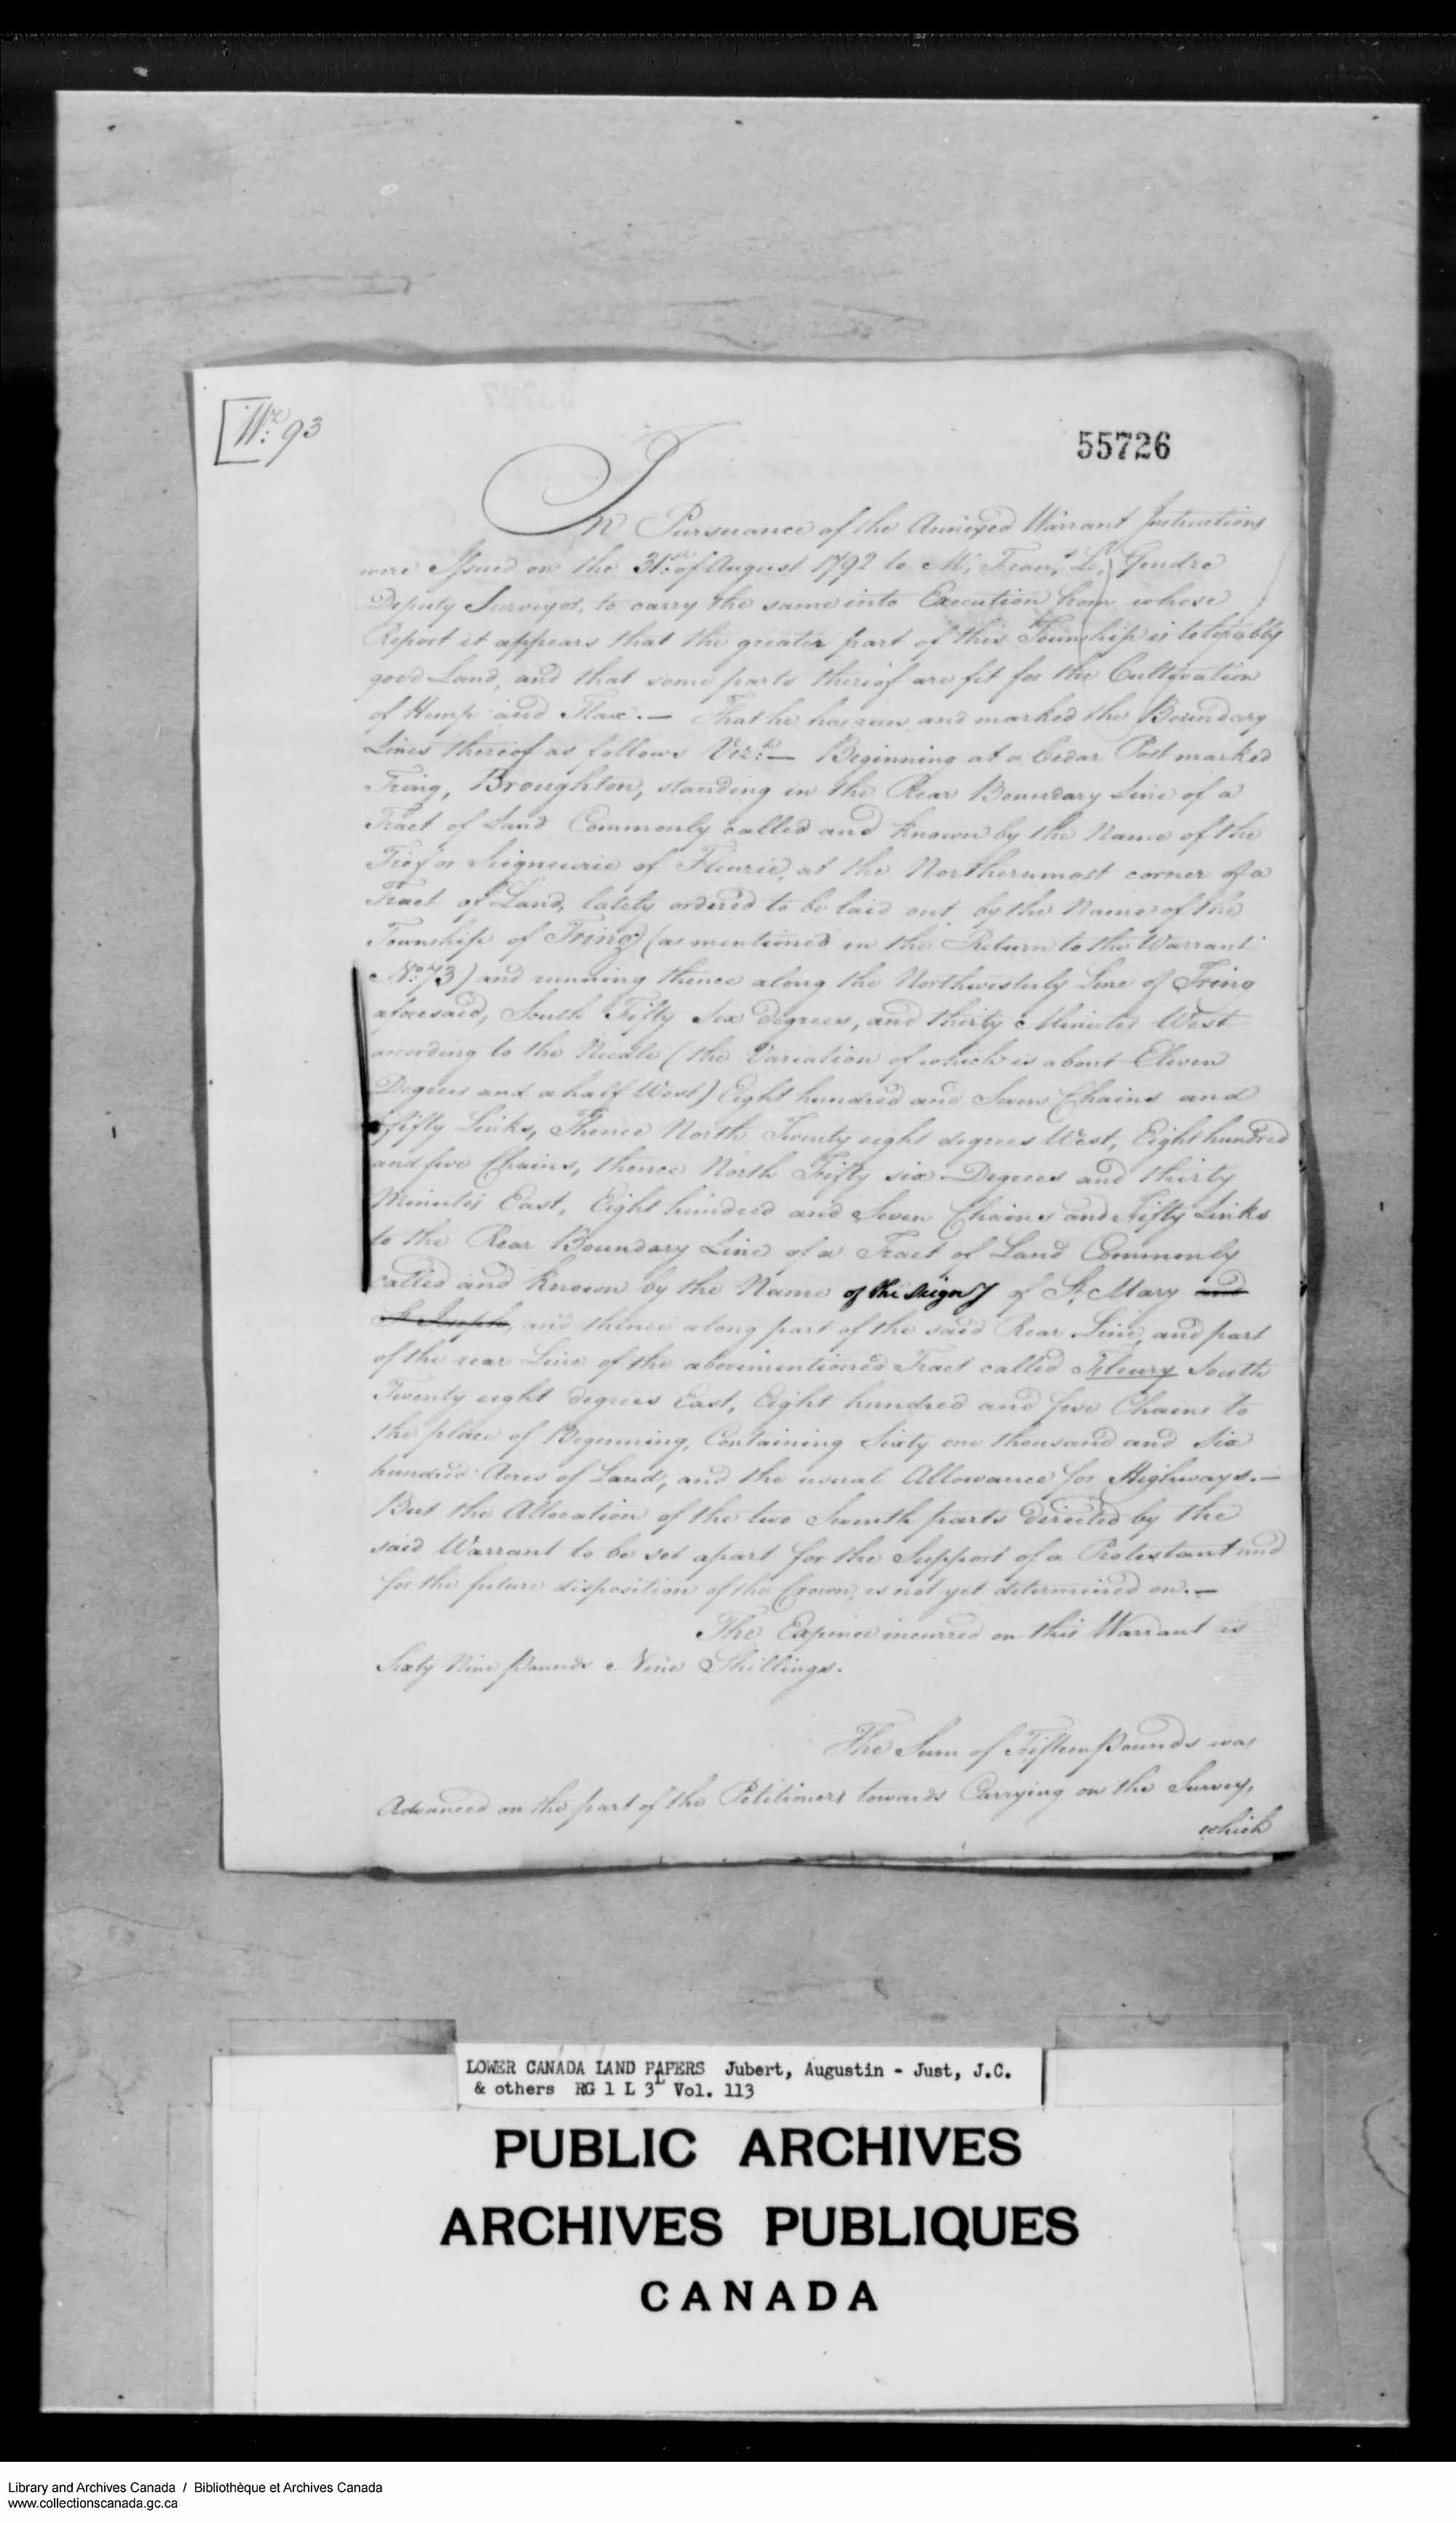 Digitized page of  for Image No.: e008700214